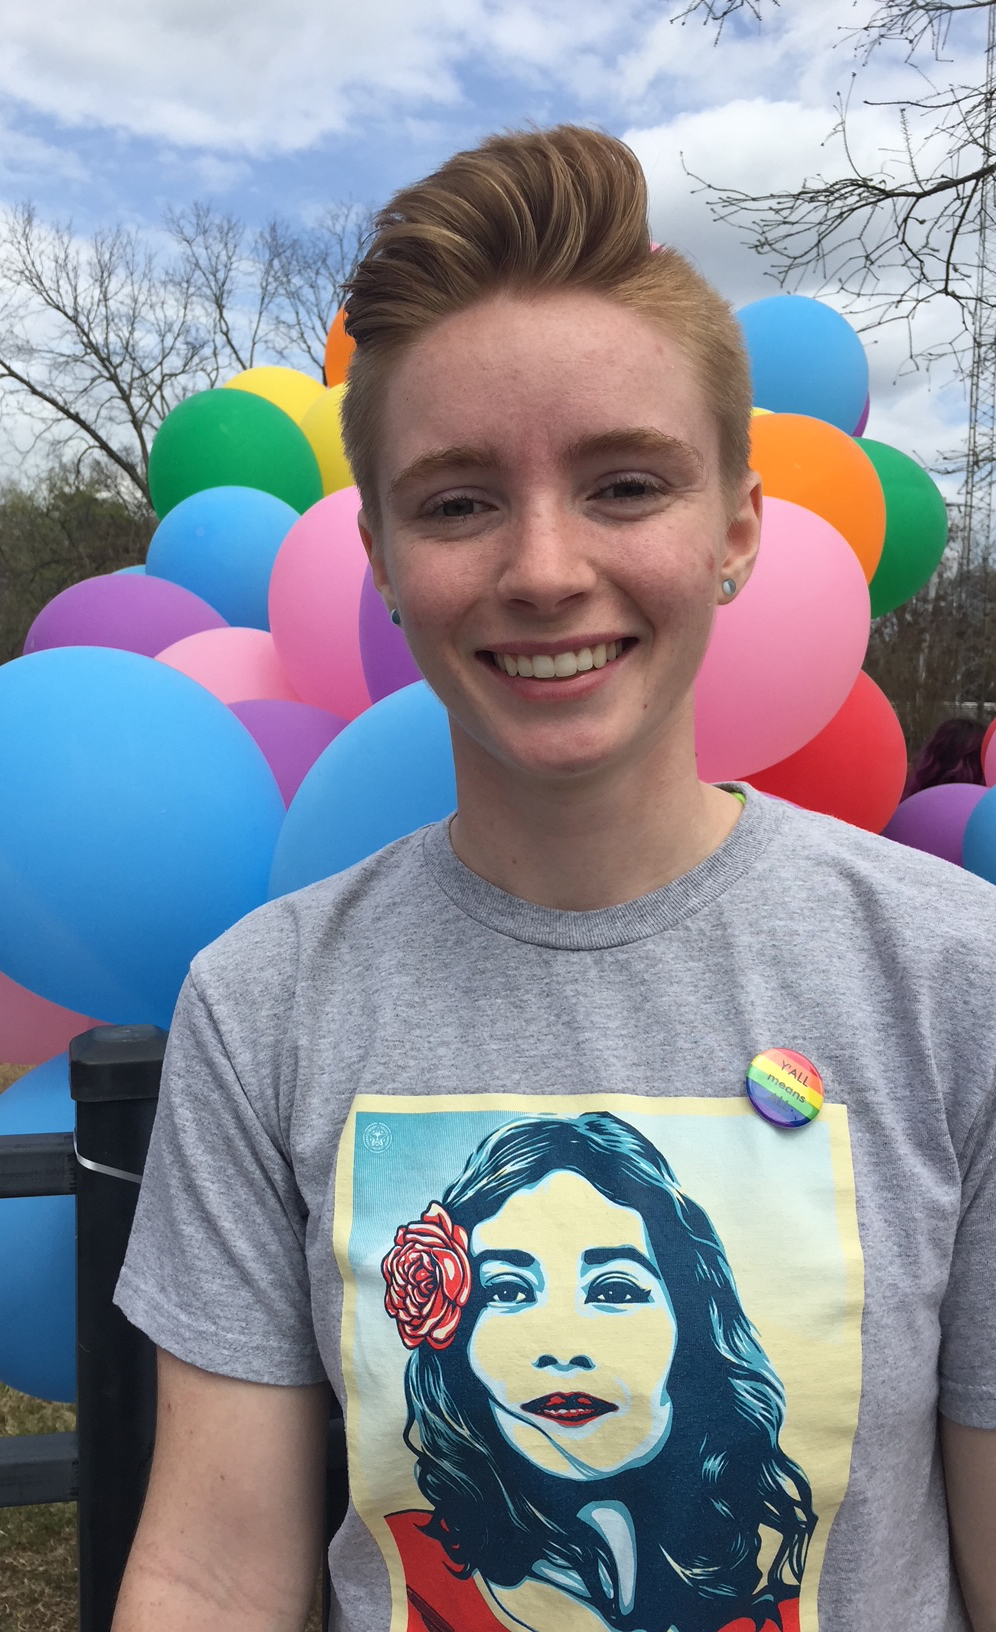 Reggie Willis attends the Starkville Pride Parade in 2018 as part of the UM Pride Network. Submitted photo